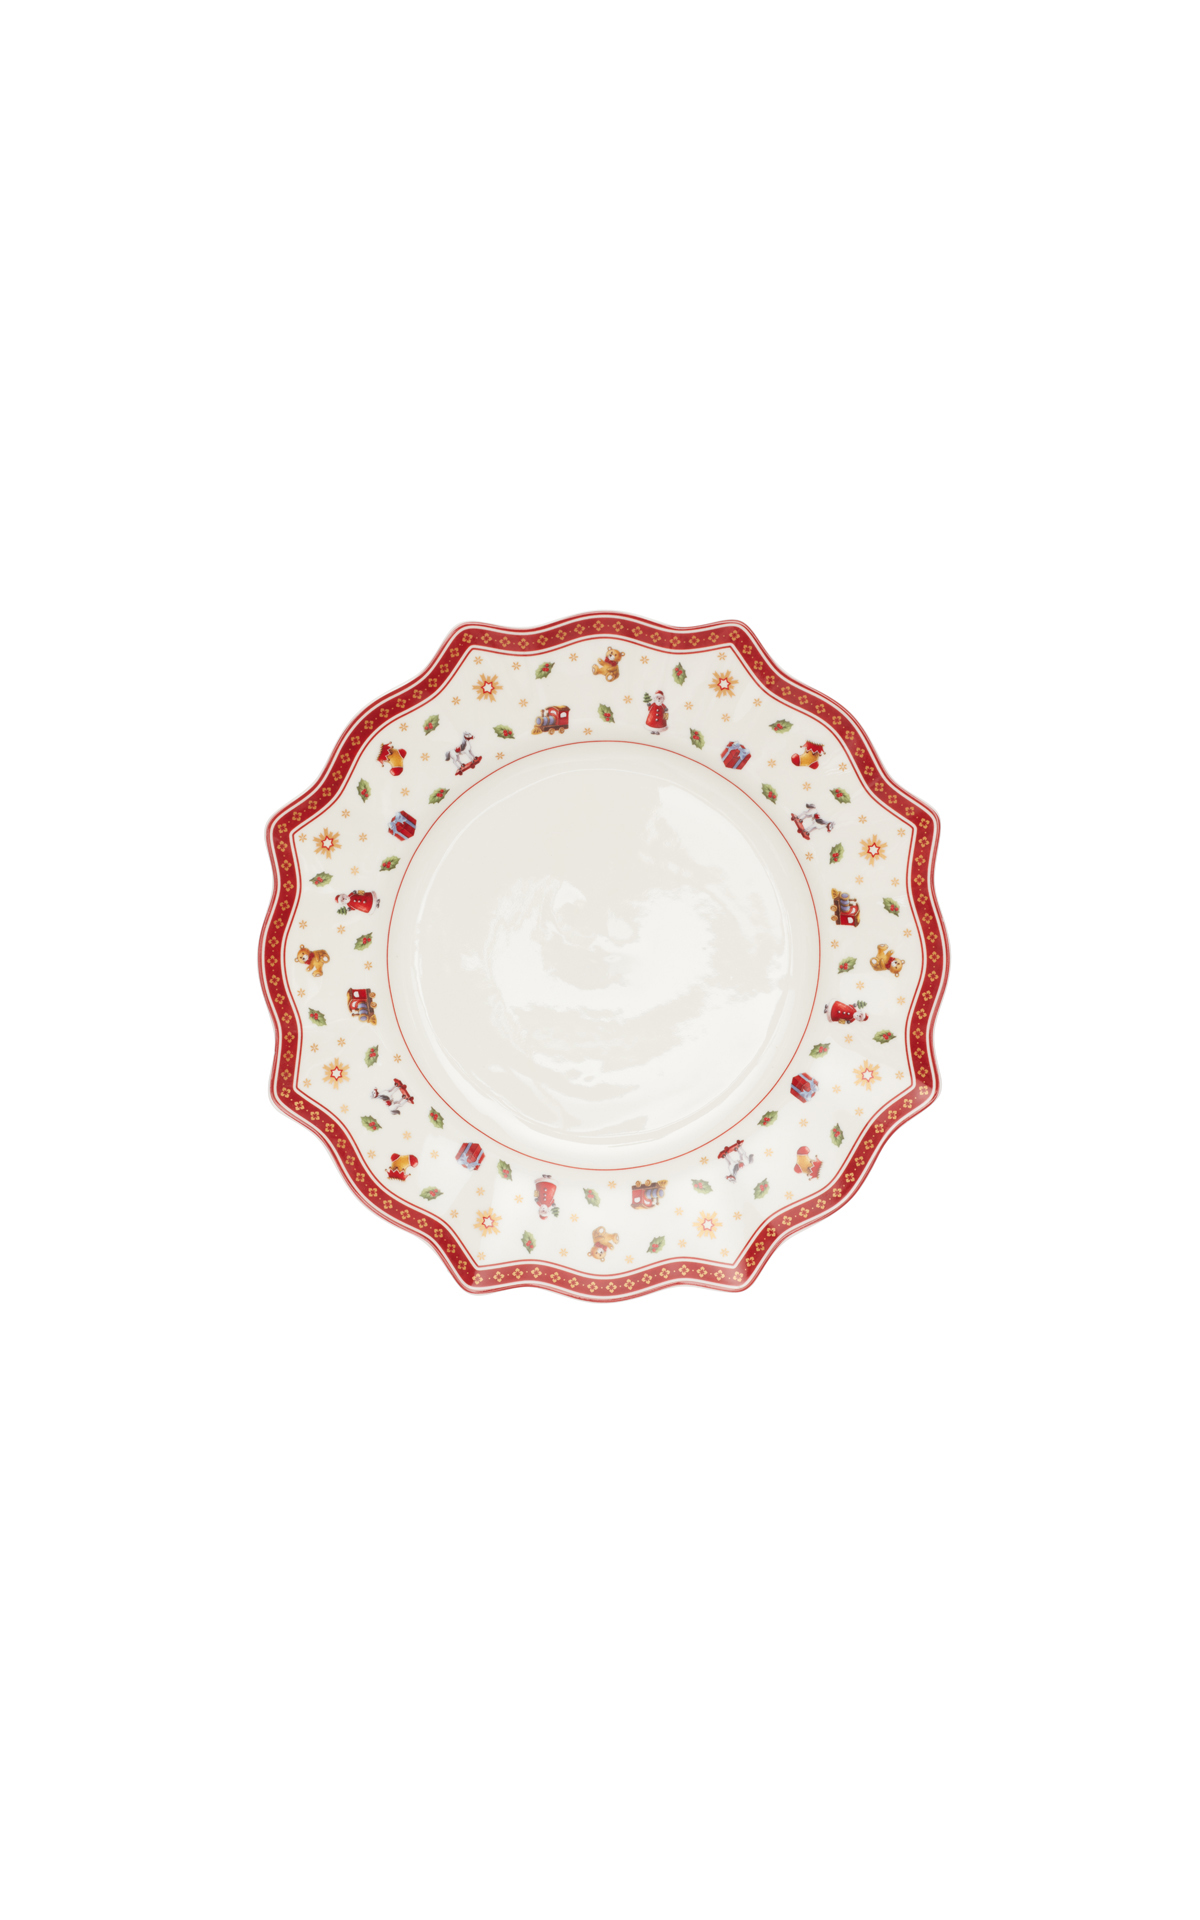 Villeroy & Boch Toy's delight plate  from Bicester Village